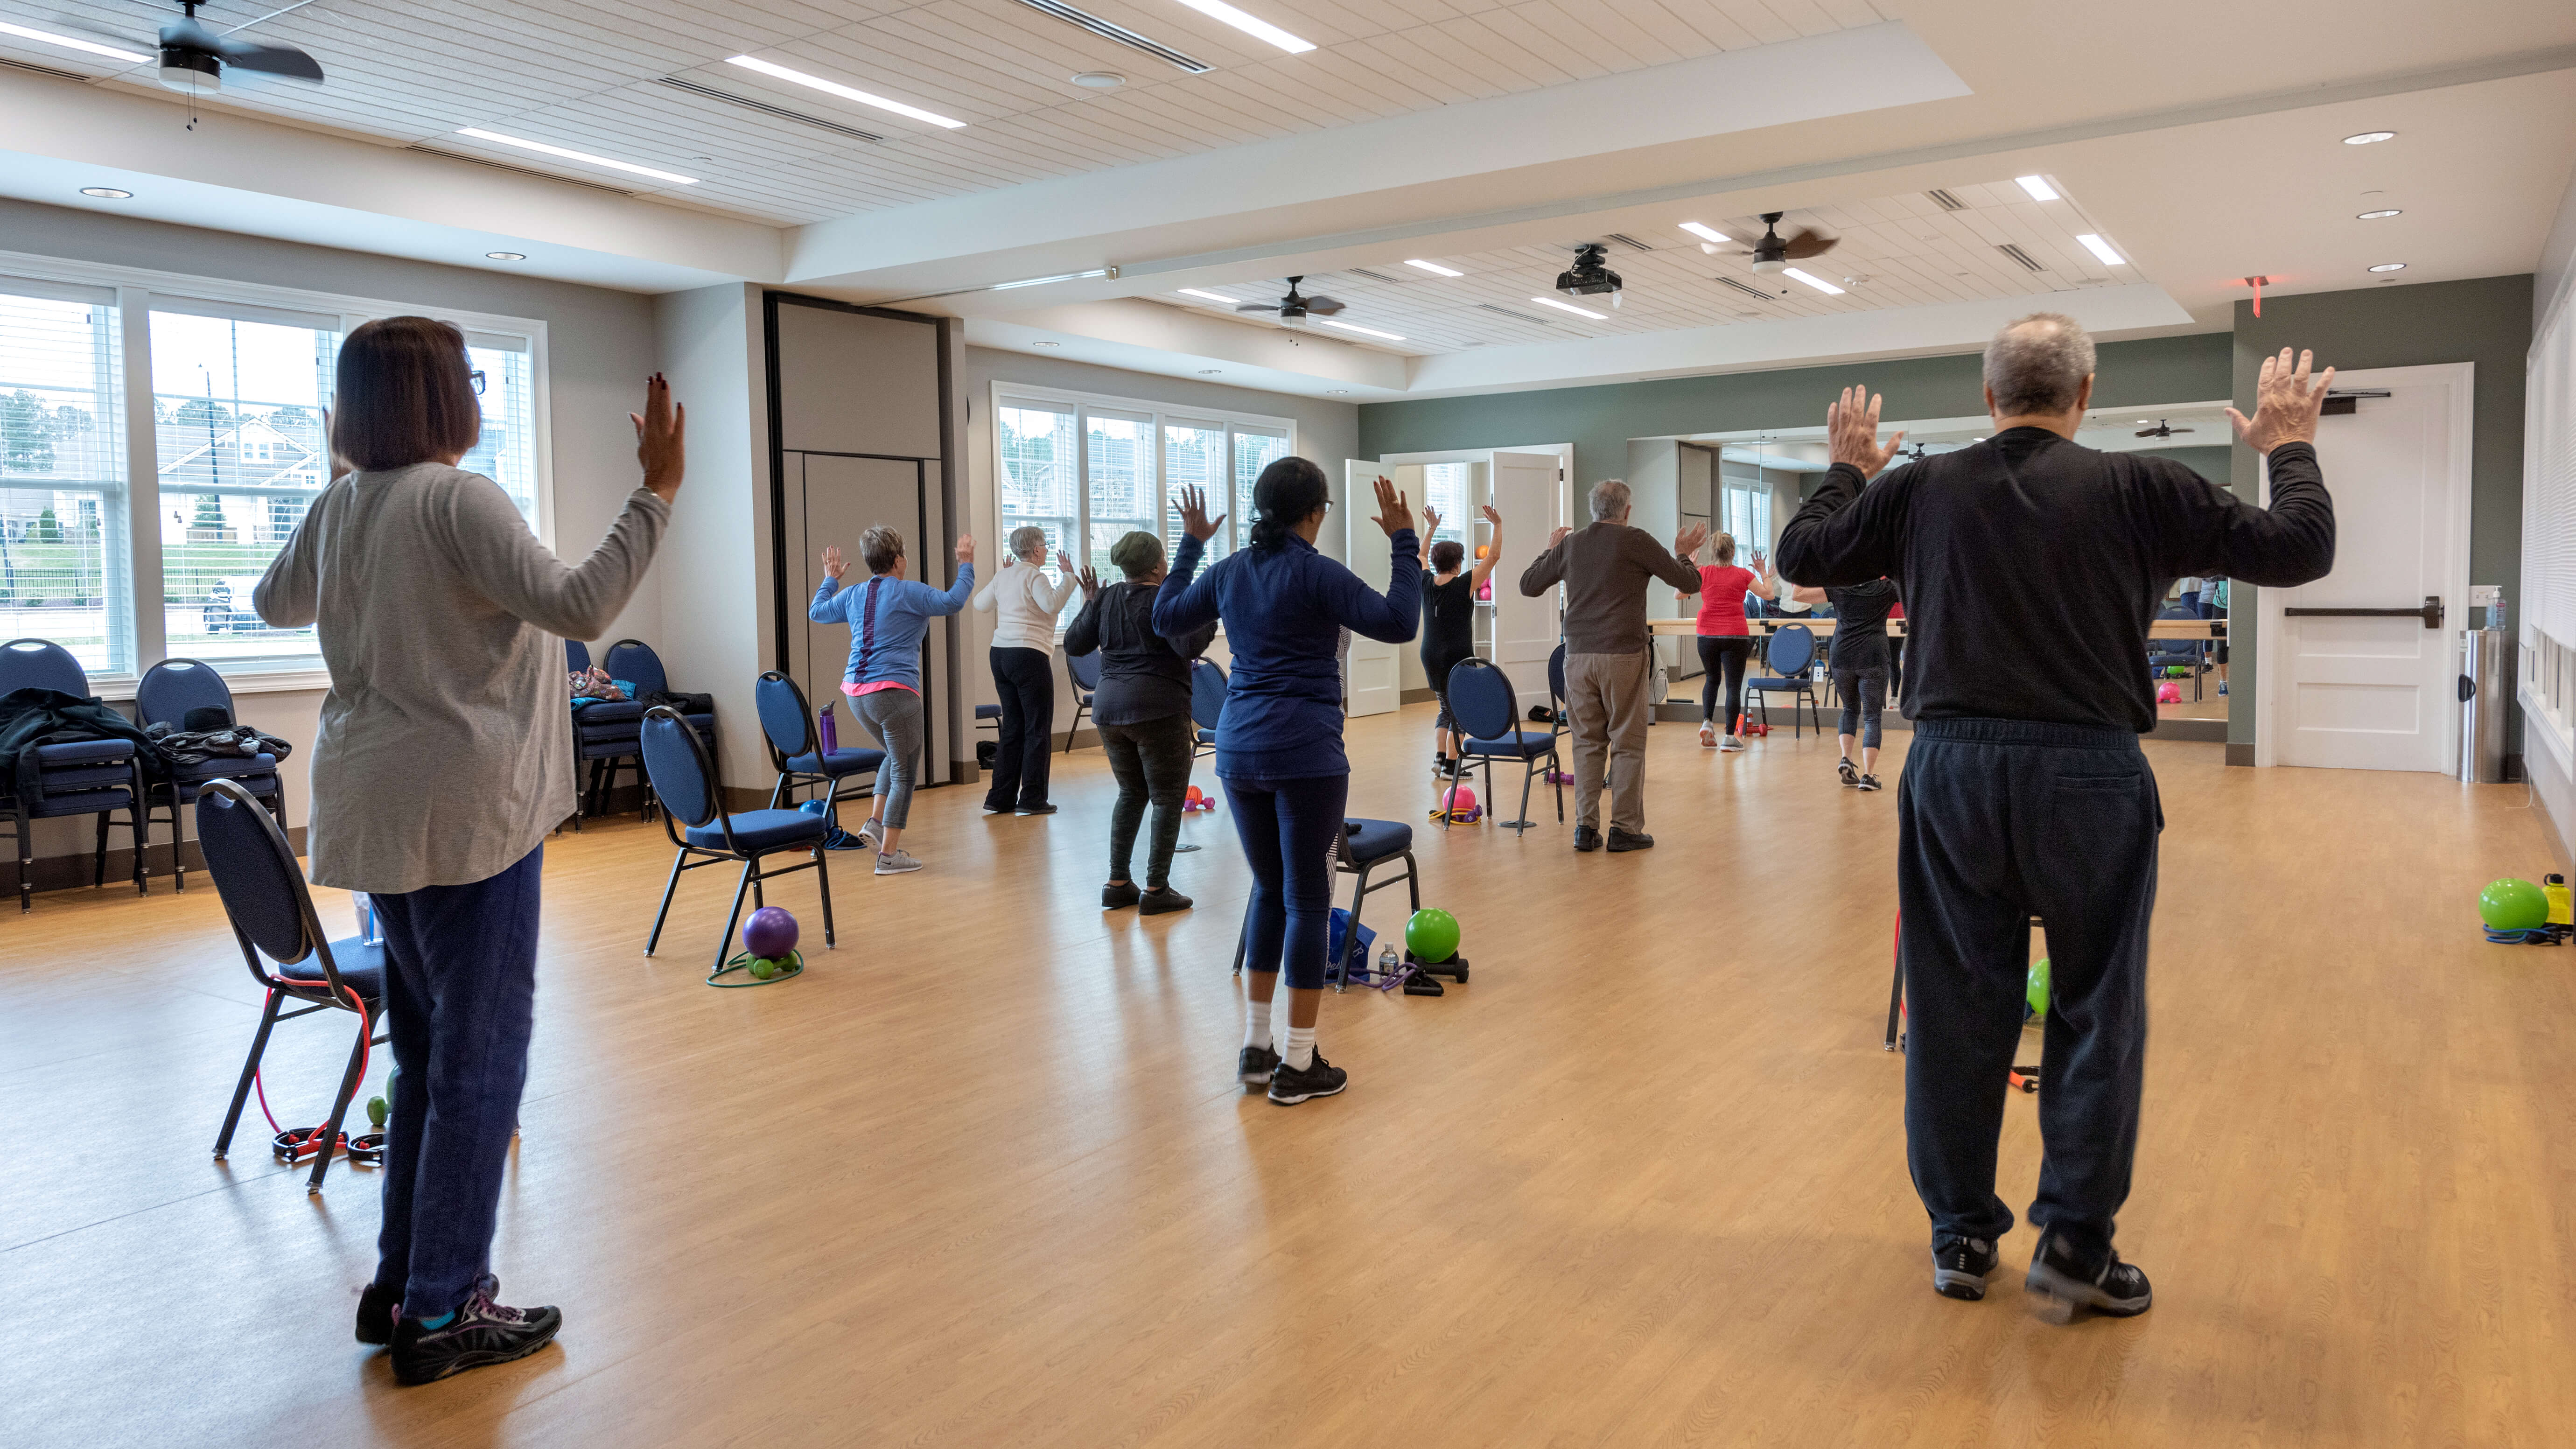 Residents of Creekside at Bethpage in Durham, NC attend a class at the aerobics and yoga studio